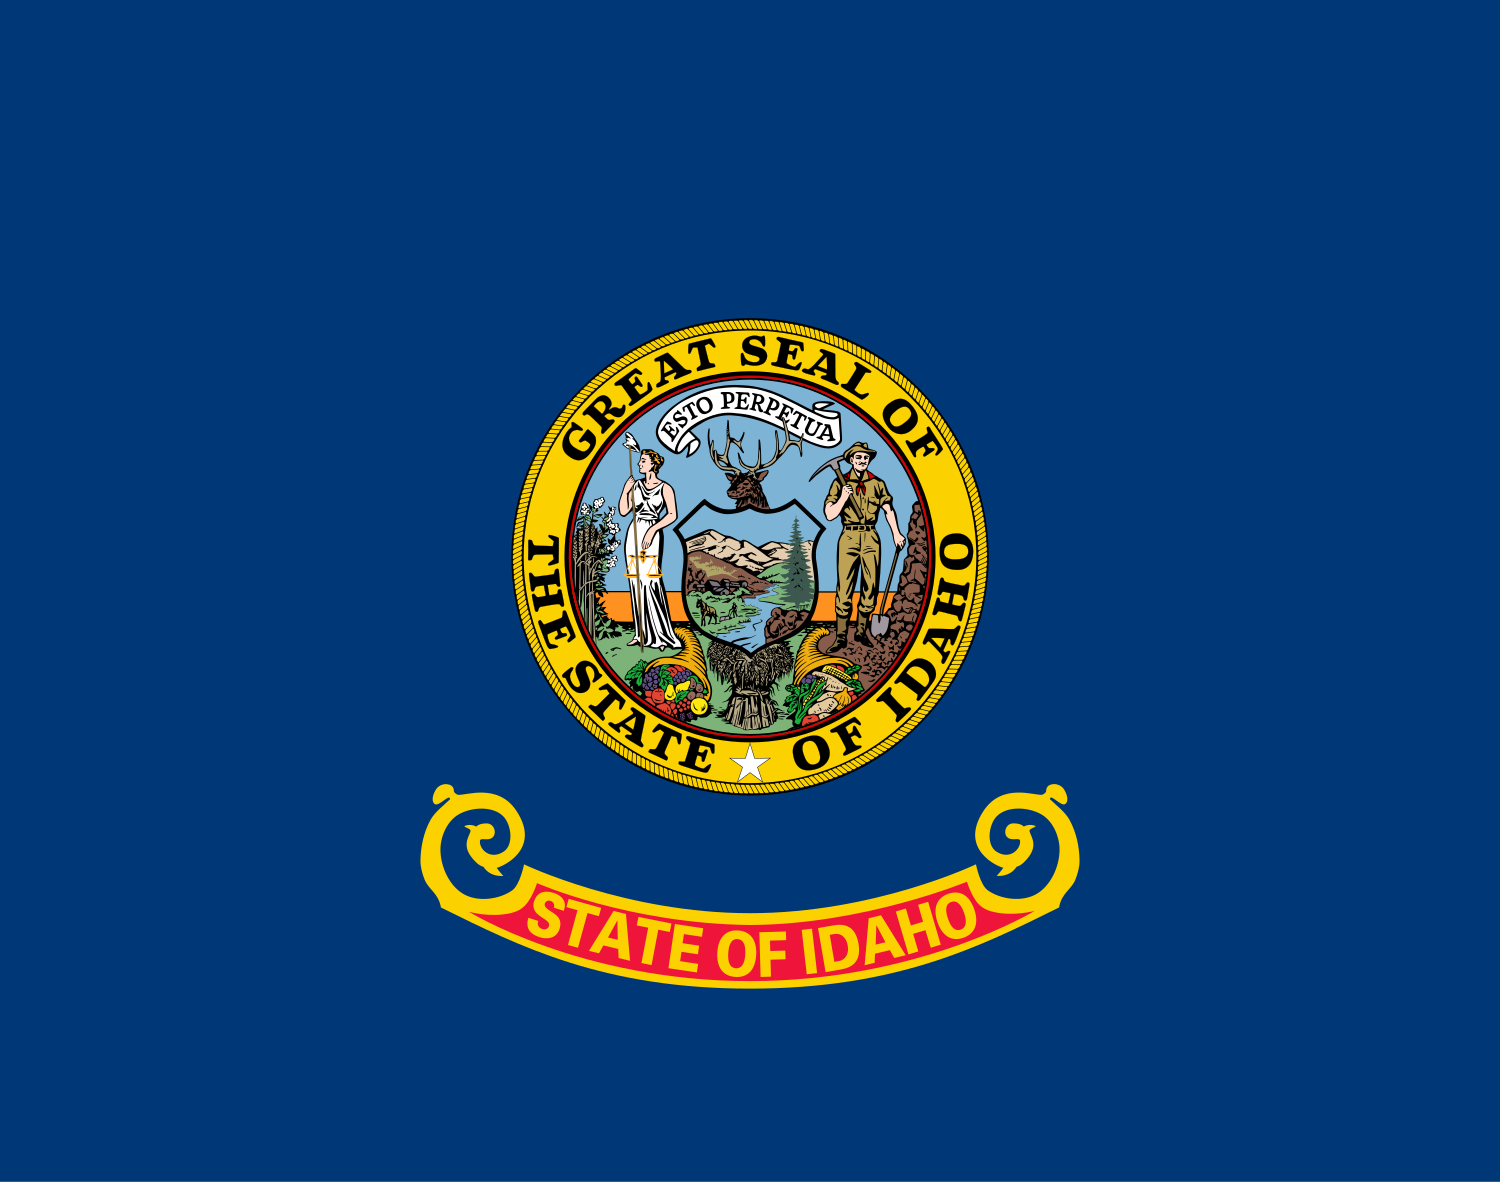 https://upload.wikimedia.org/wikipedia/commons/thumb/a/a4/Flag_of_Idaho.svg/1500px-Flag_of_Idaho.svg.png